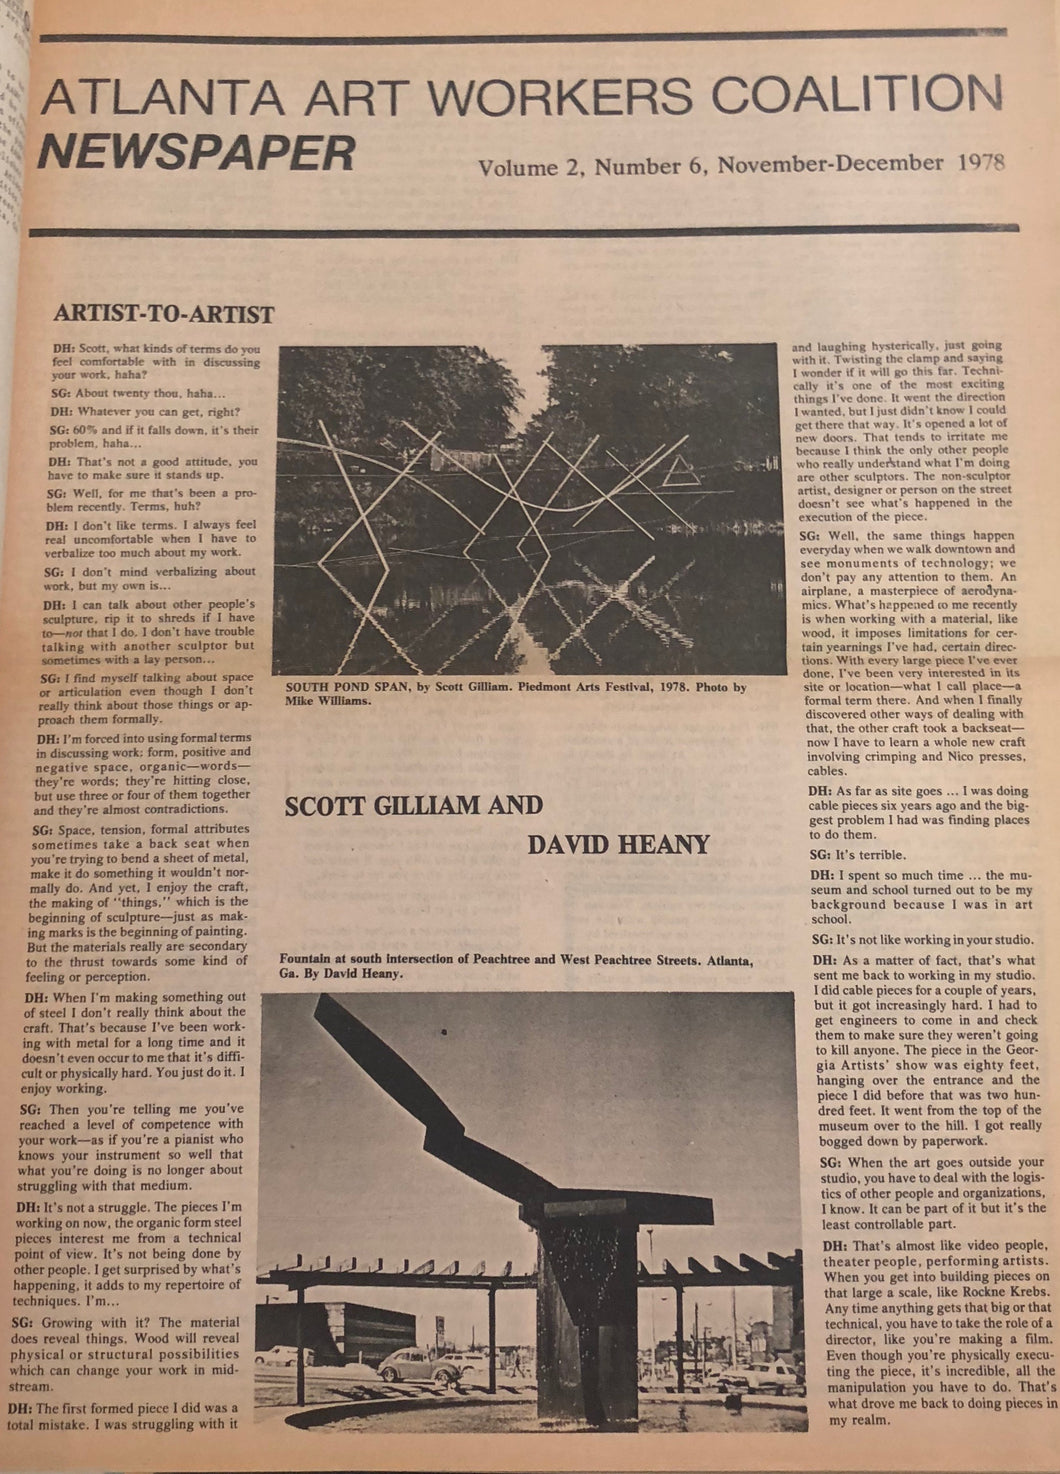 ART PAPERS 02.06 - Nov/Dec 1978 - SOLD OUT